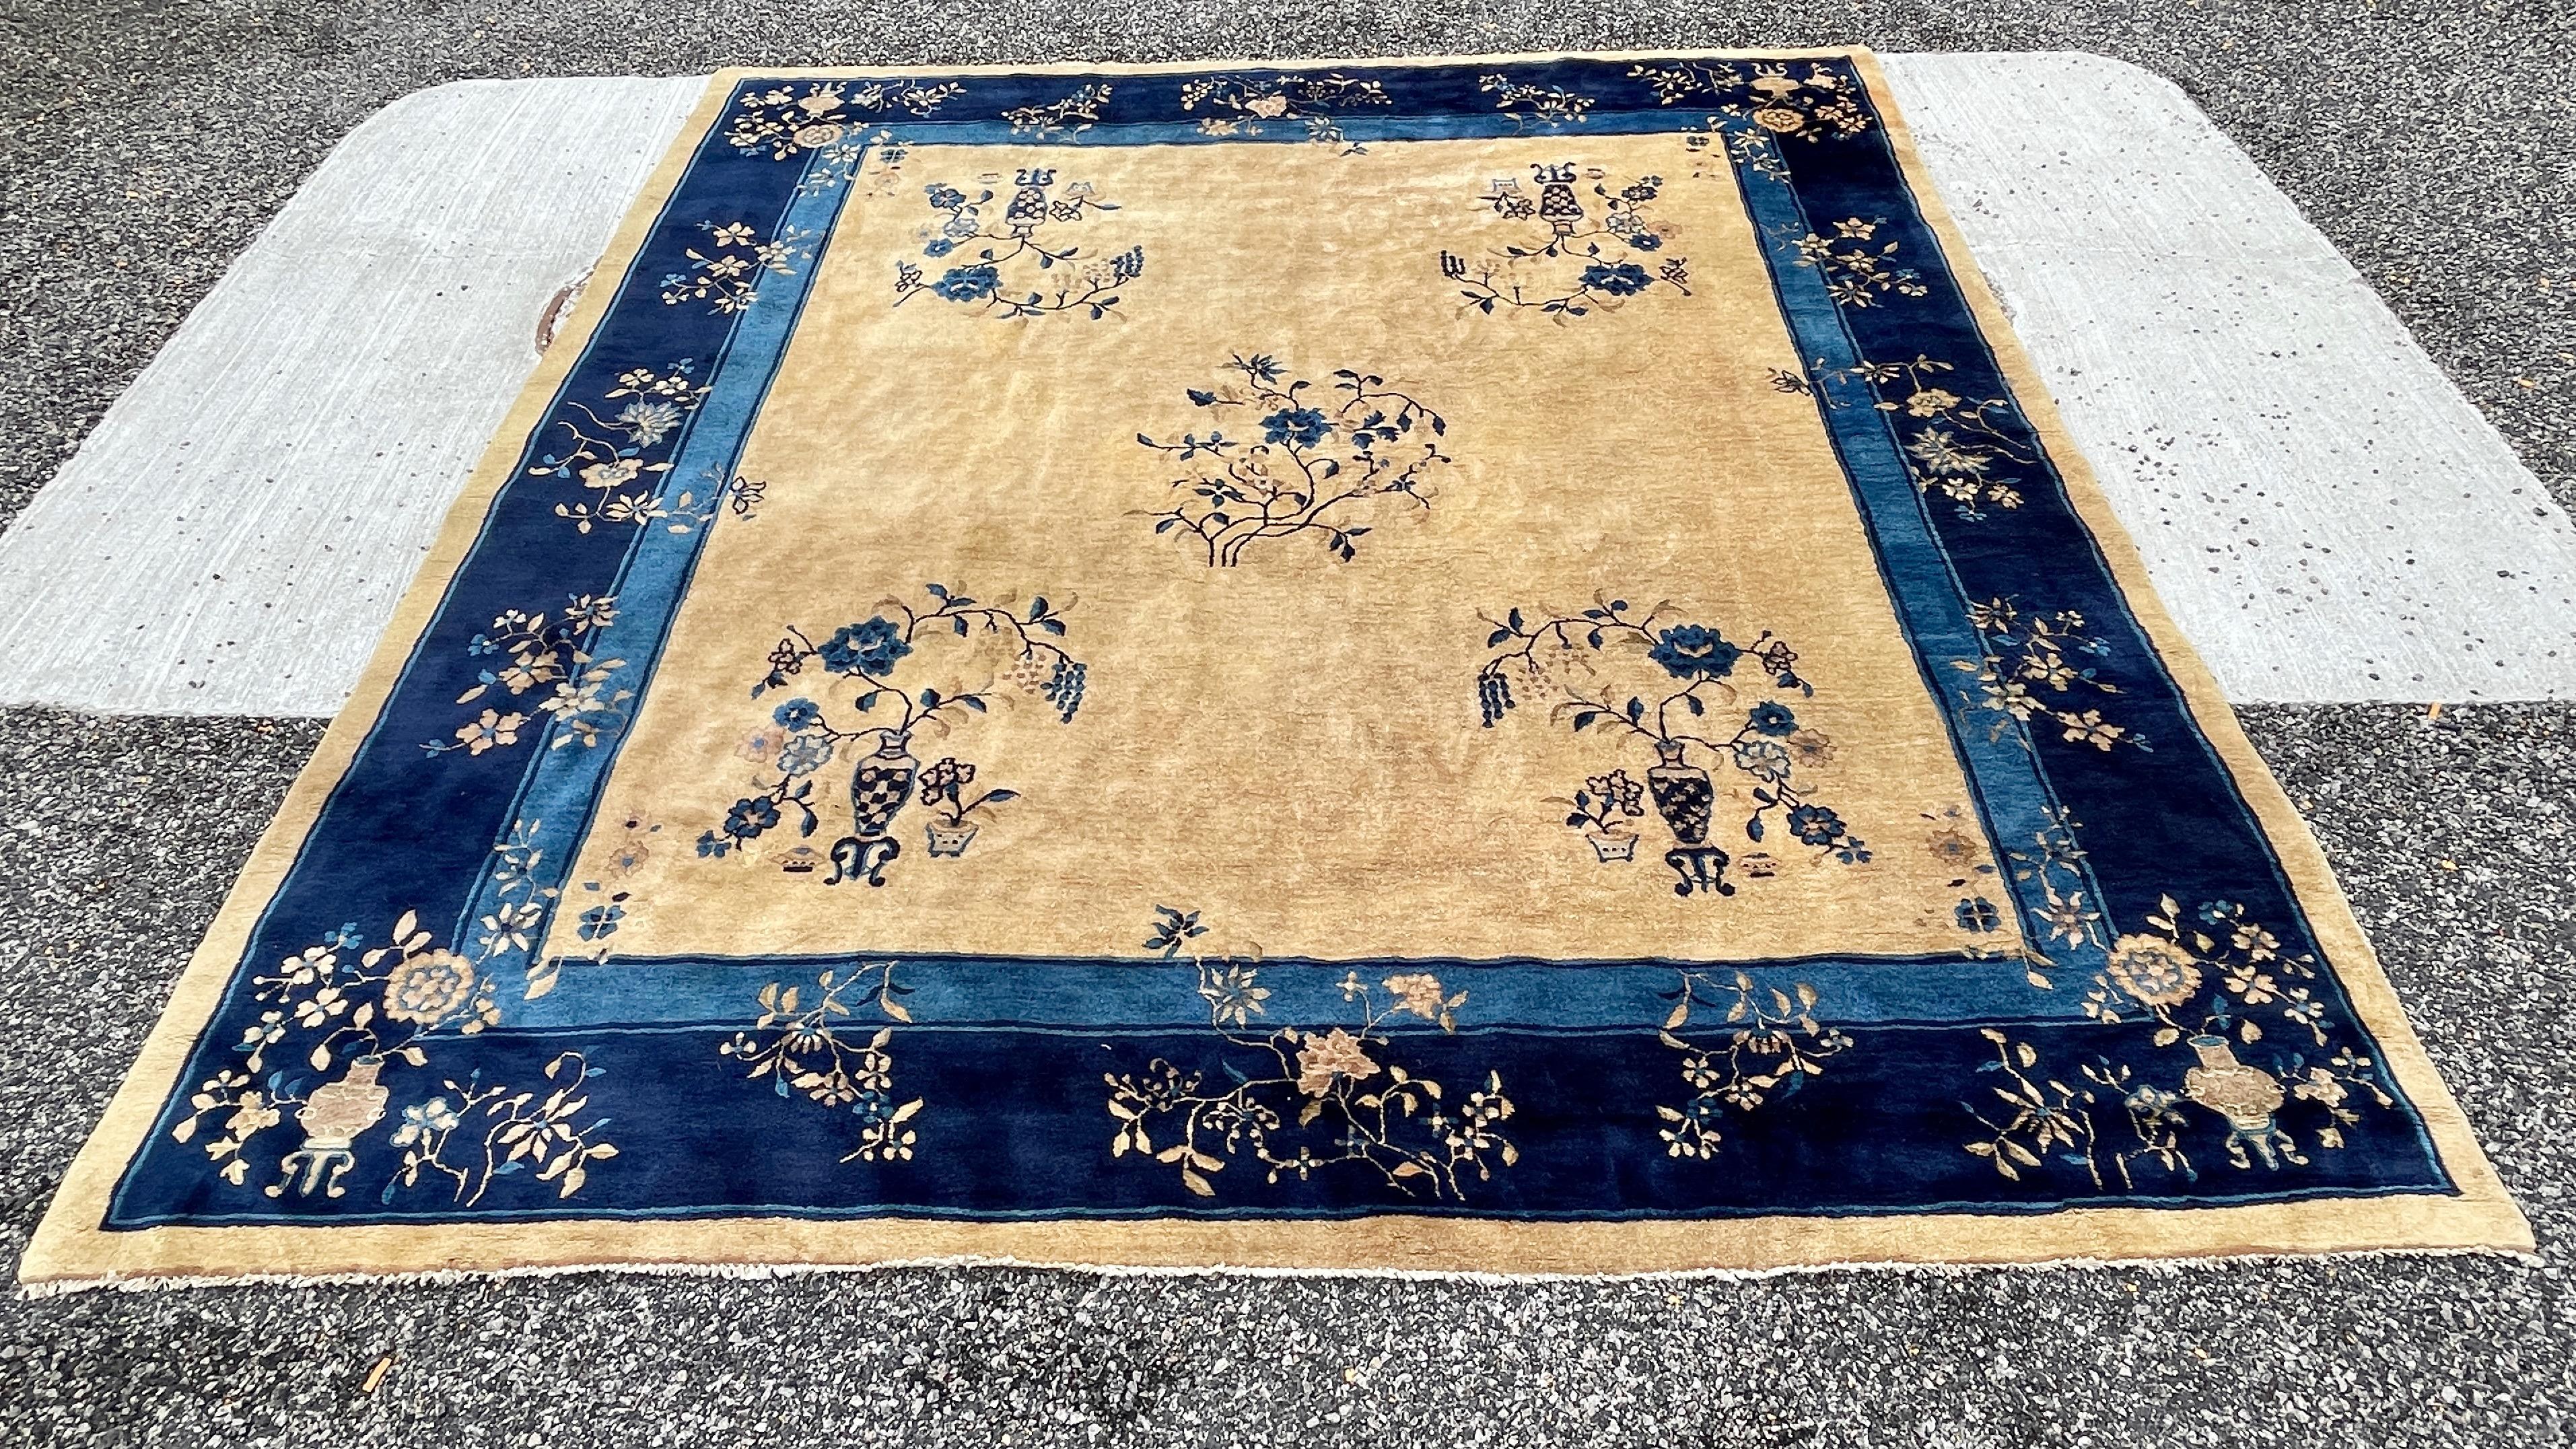 1920's Peking Chinese Art Deco Rug 9' x 10' For Sale 1